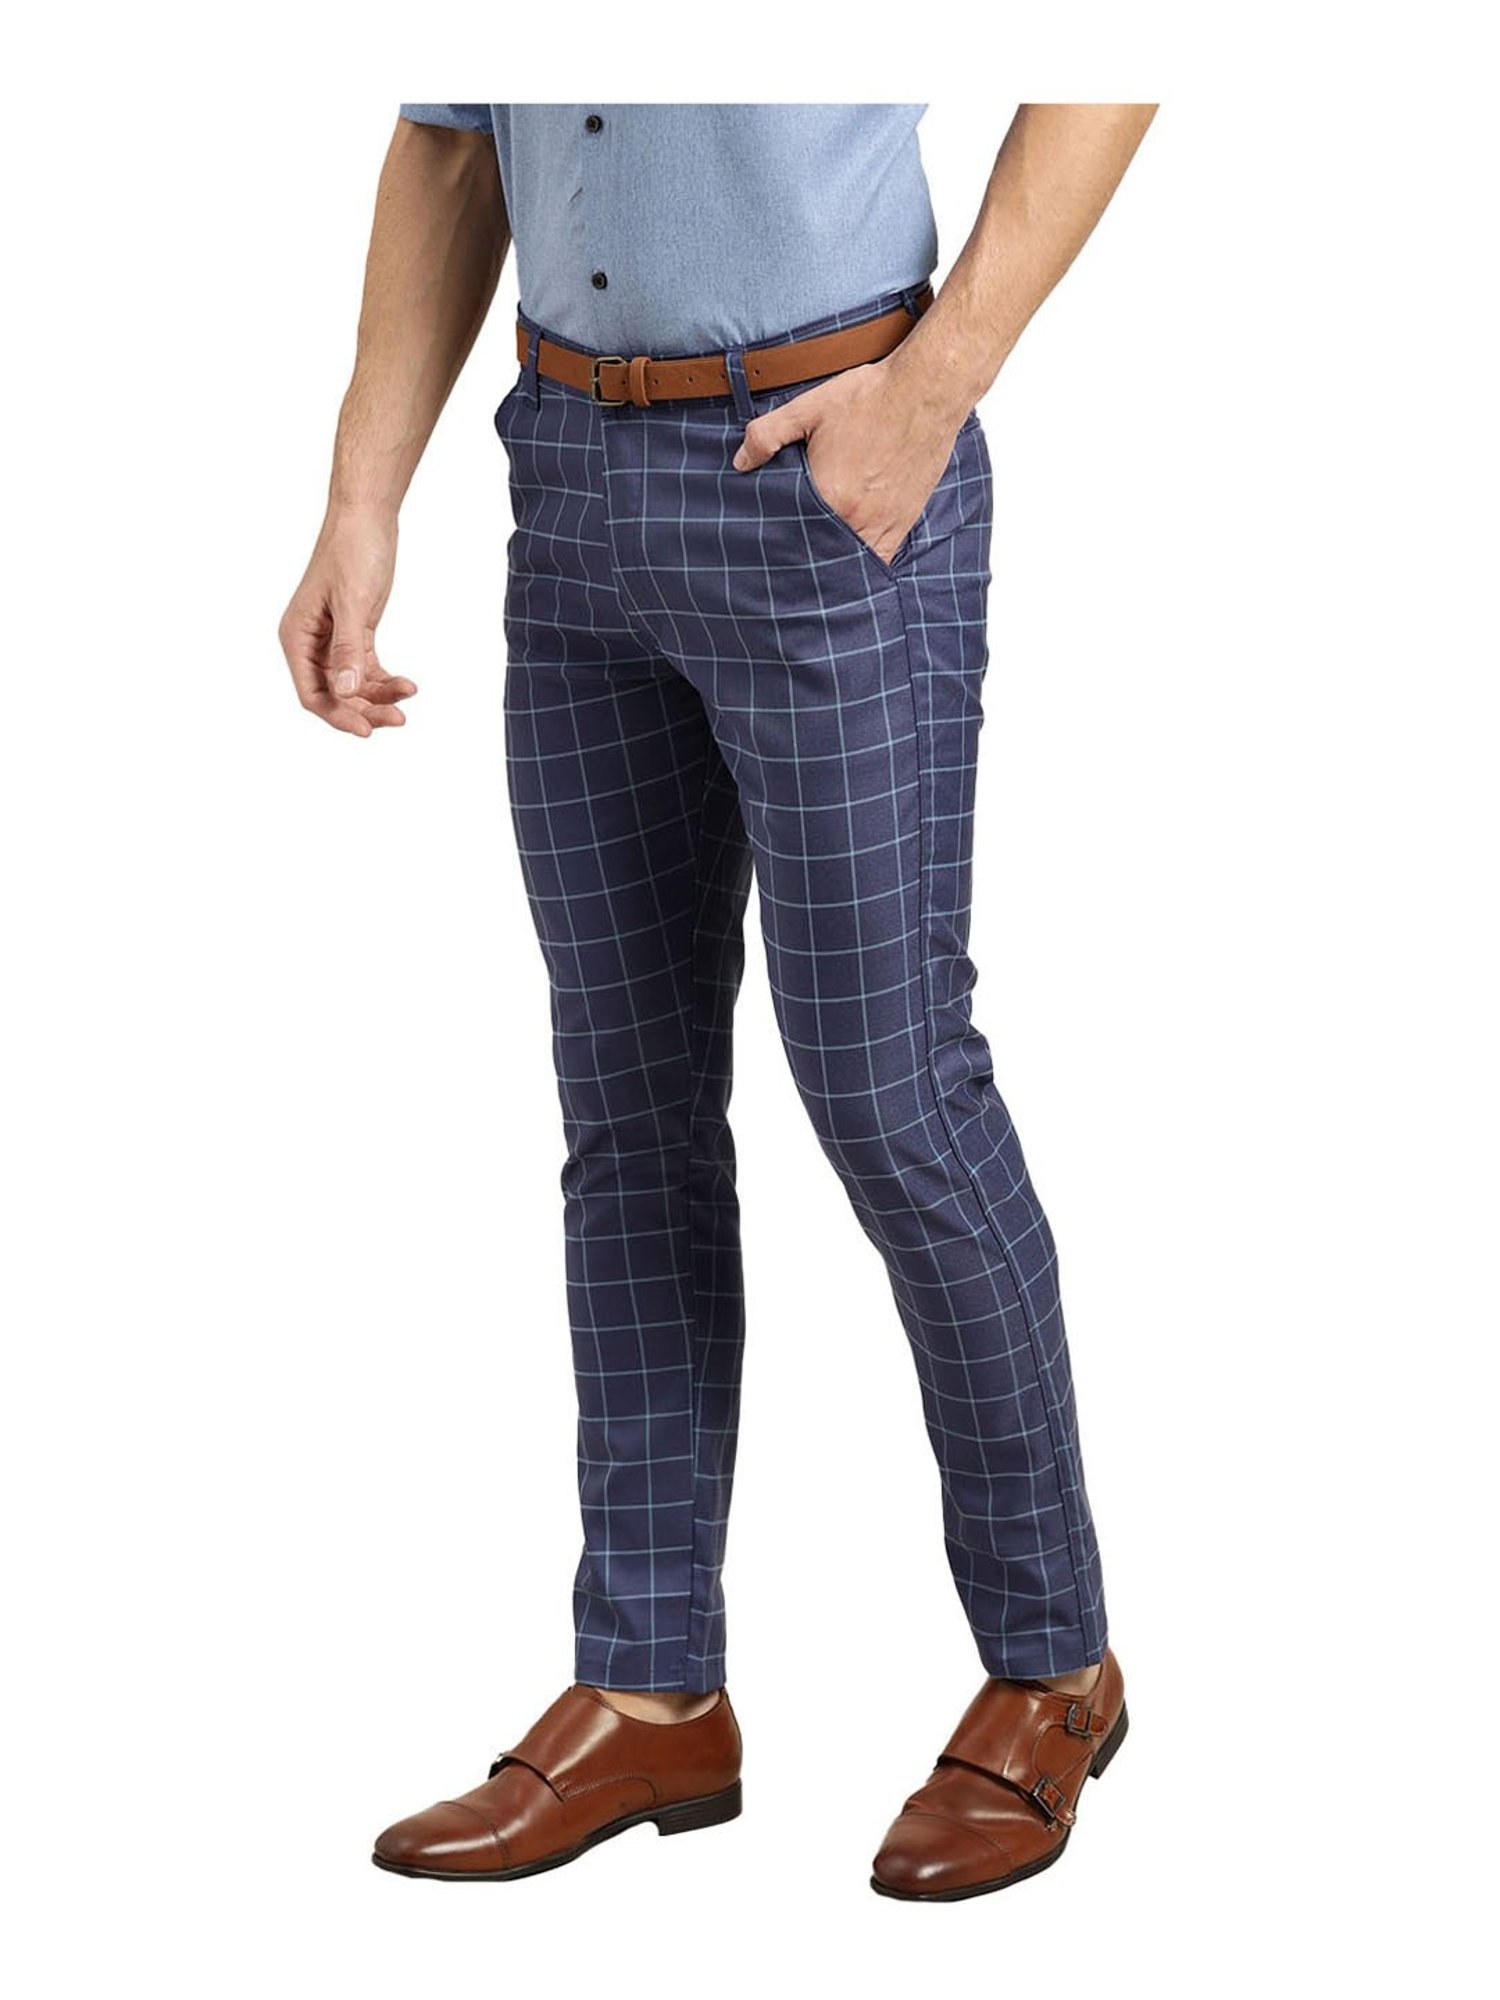 Mens Blue Check Cotton Trouser, Formal Wear, Chinos at Rs 550 in Gurgaon